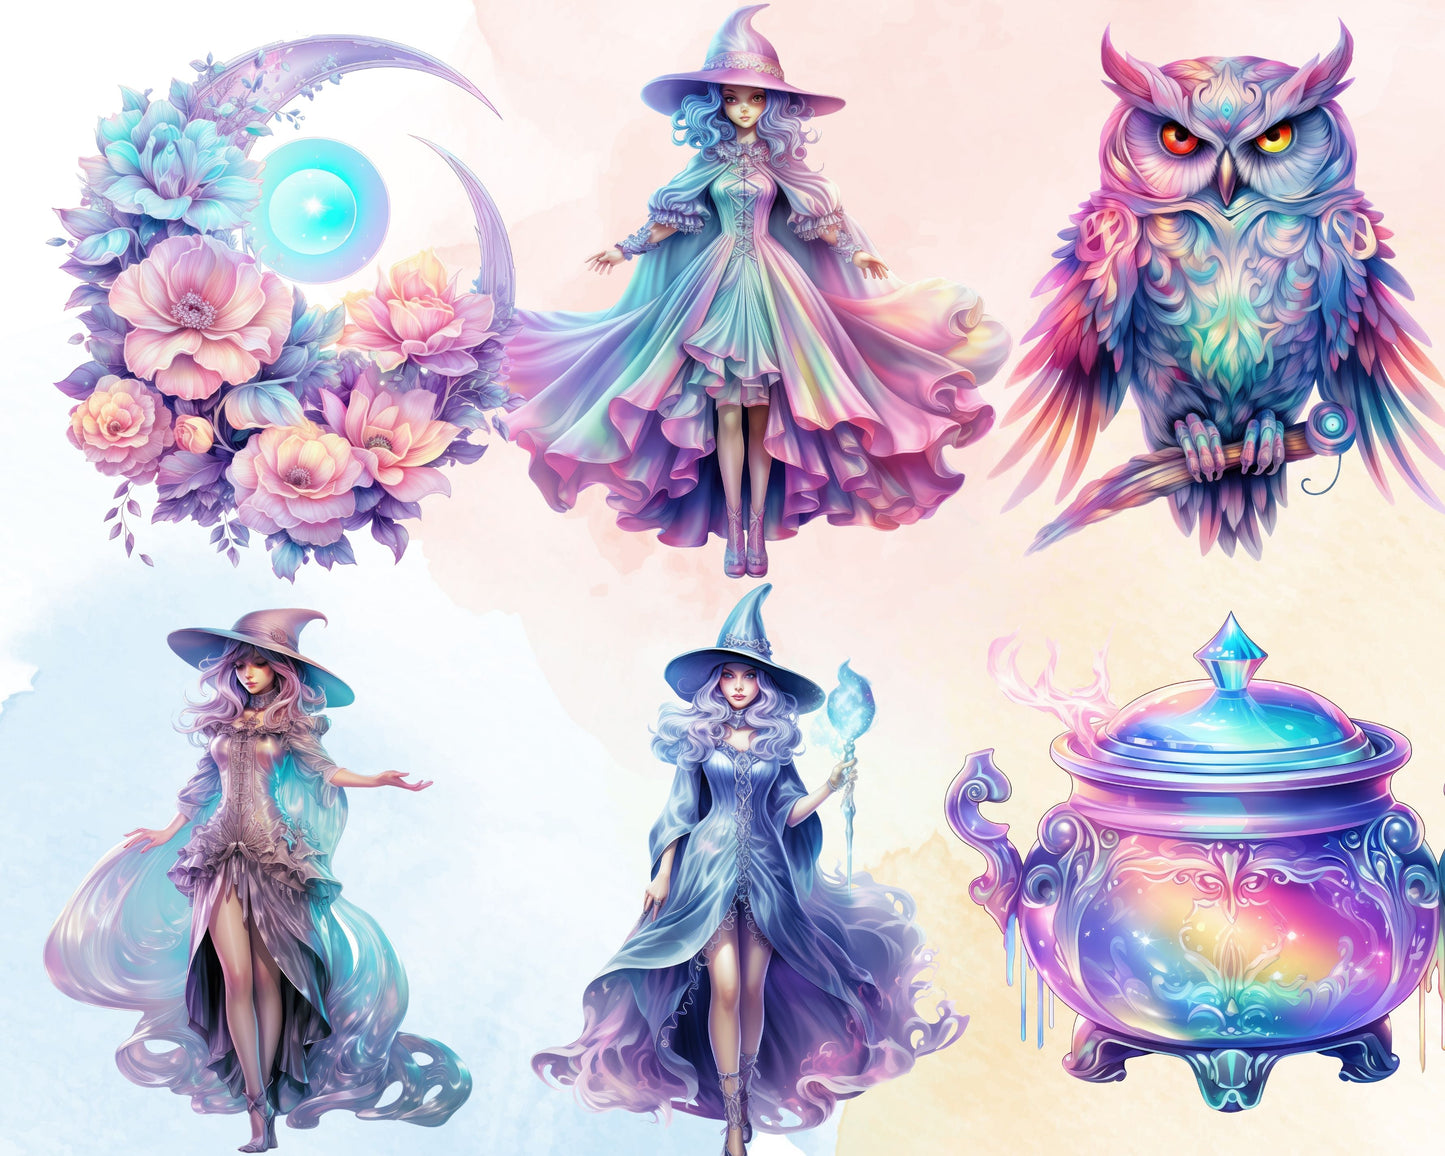 Pastel Witch Clipart, Halloween Witch Illustrations, Witchy Digital Graphics, Cute Witchcraft Art, Magical Sorceress Drawings, Spooky Holiday Decoration, Witchy Aesthetic Designs, Fantasy Witchcraft Images, Whimsical Halloween Prints, Enchanting Spellcaster Graphics, Wiccan Holiday Clipart, Mystical Witchcraft Drawings, Bewitching Halloween Elements, Colorful Witchy Artwork, Spellbinding Sorcery Illustrations